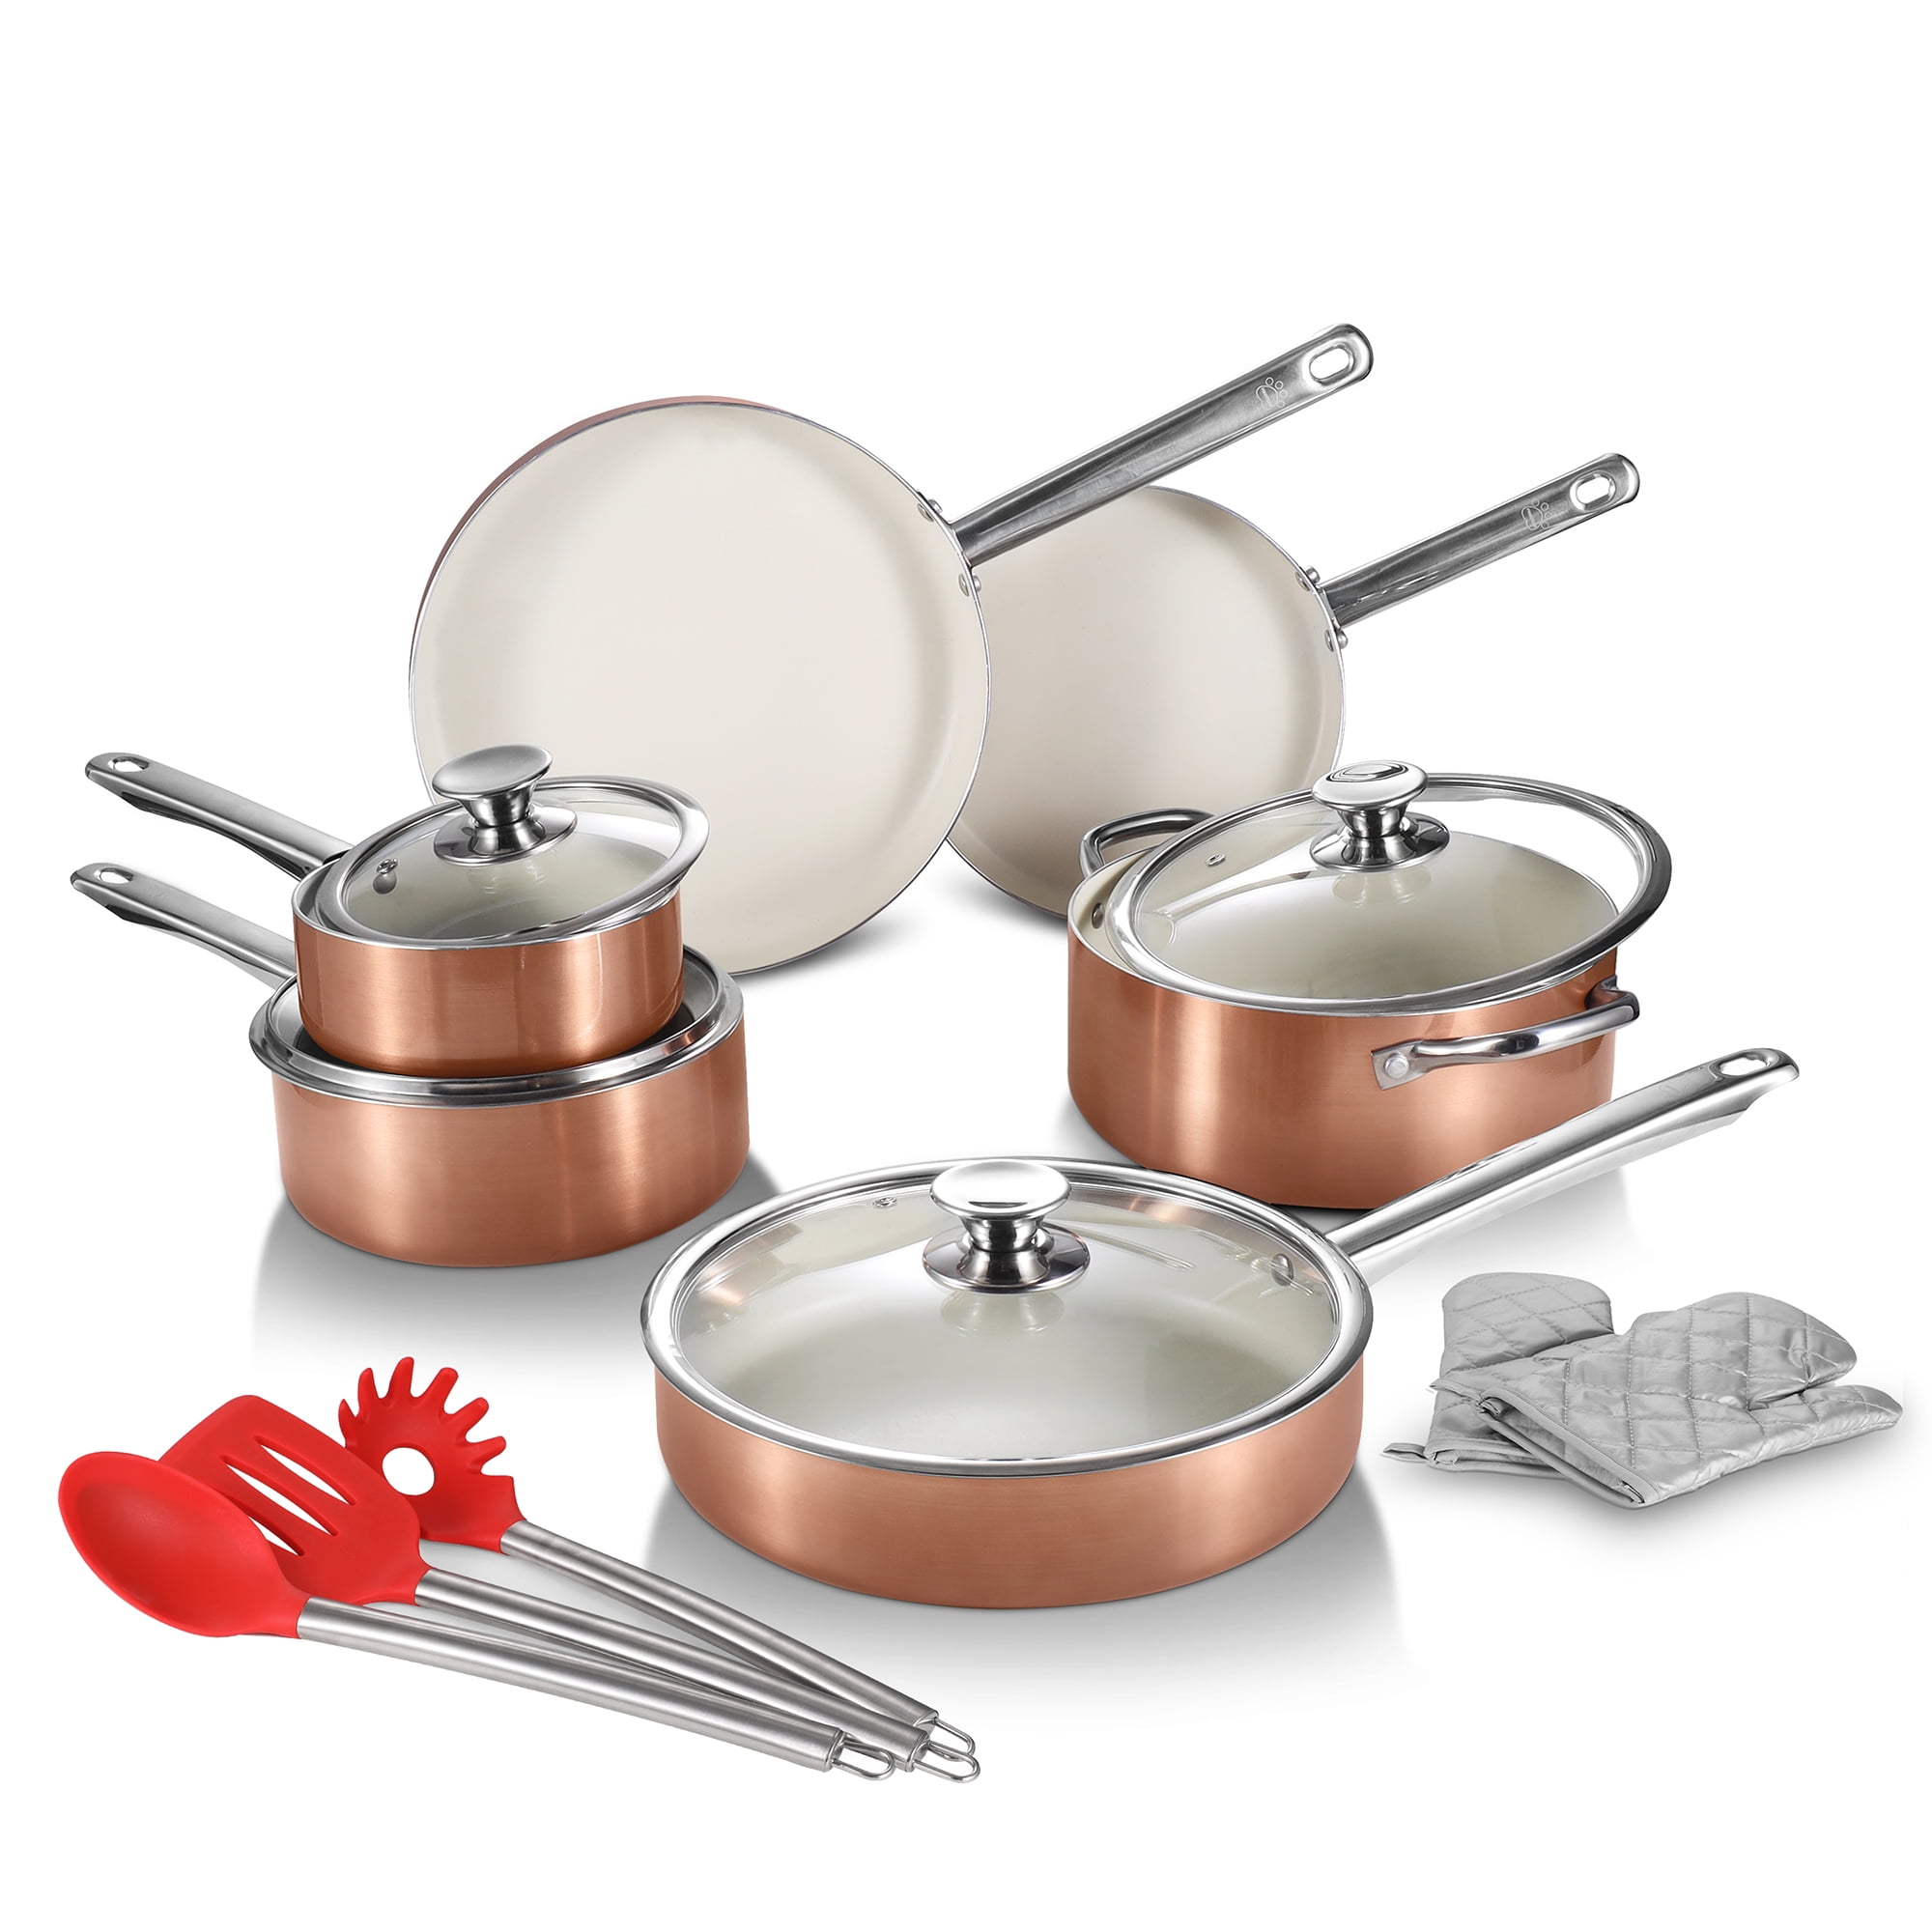 13-Piece Non-Stick Ceramic Cookware Set with Stainless Steel Handles - Rose Gold